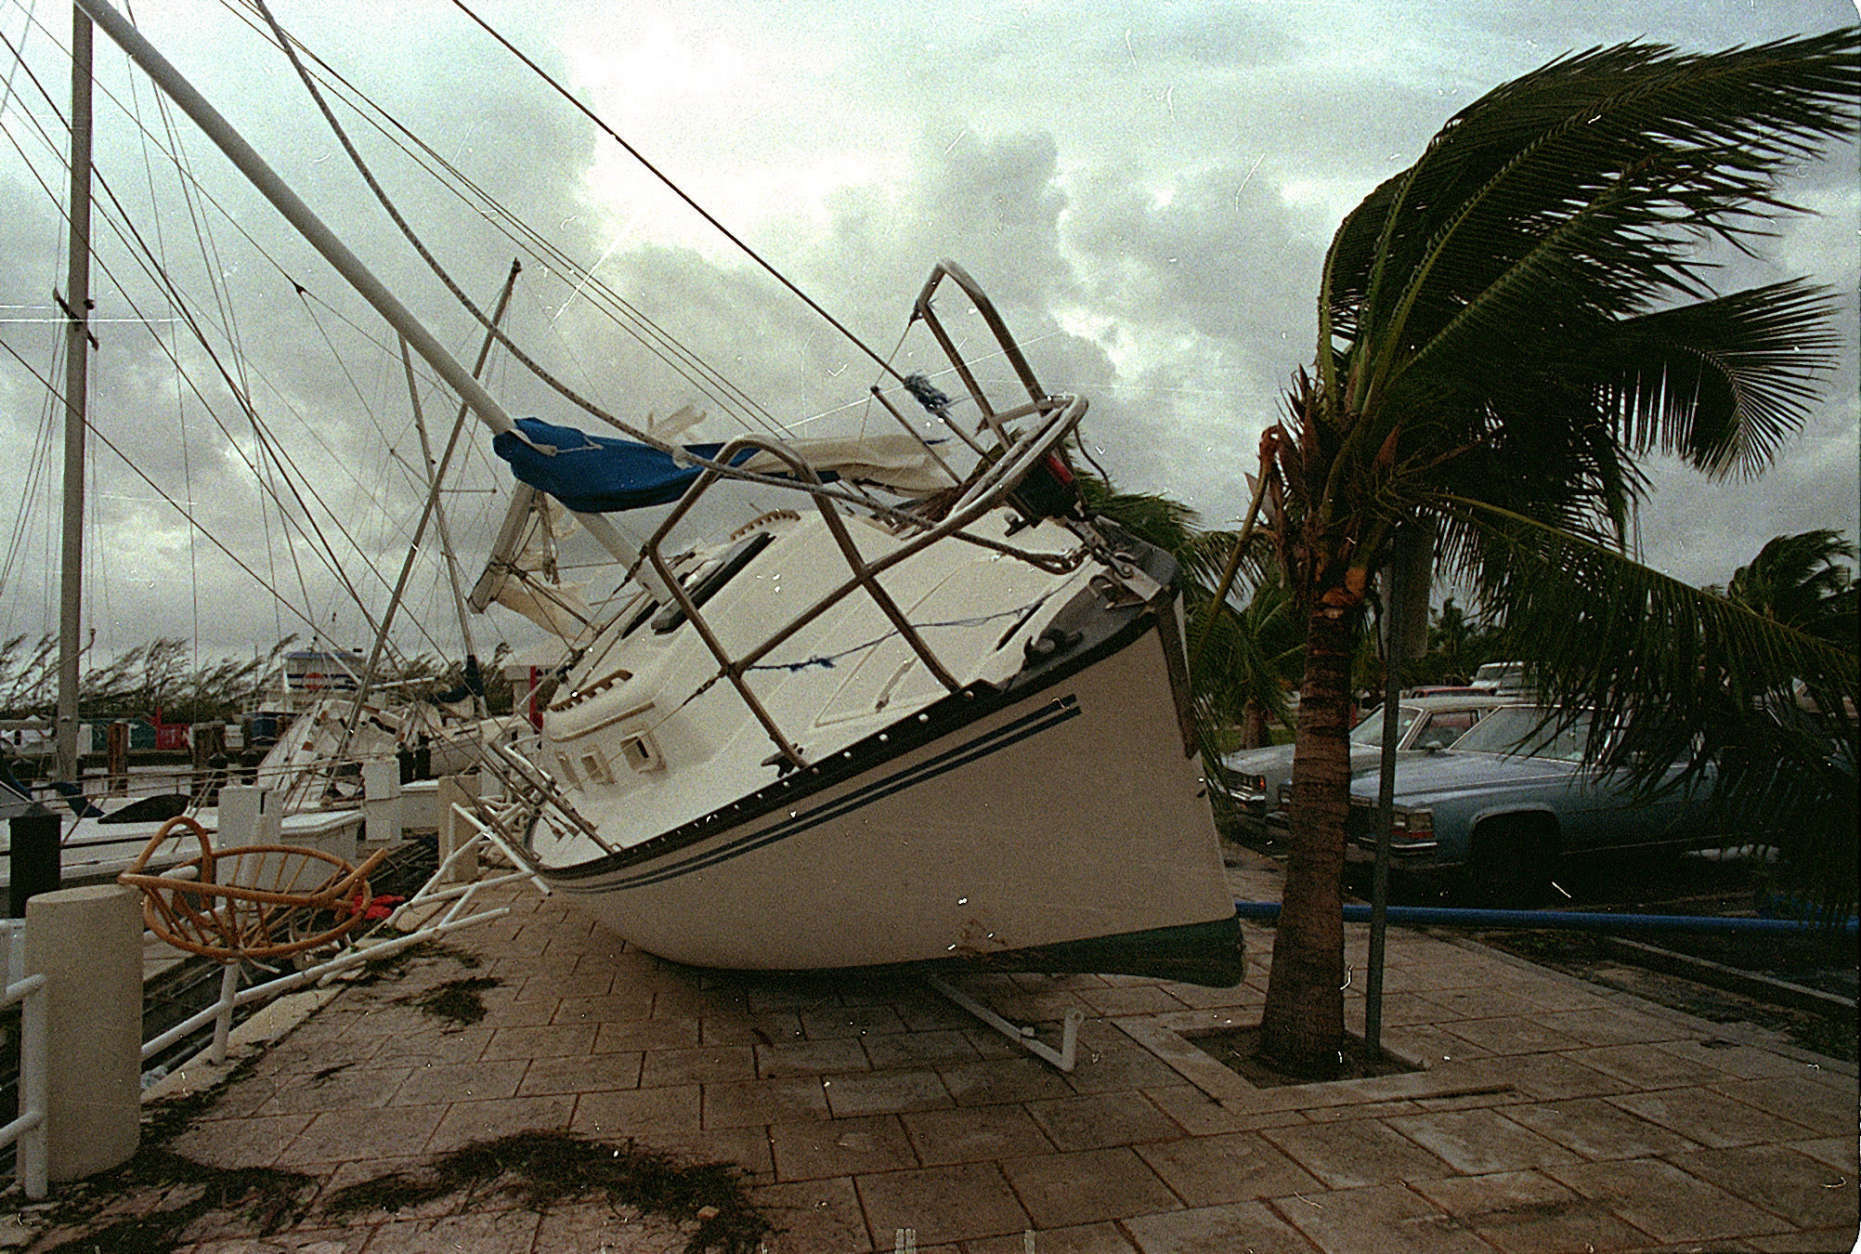 FILE - In this Aug. 24, 1992 file photo, a sailboat sits on a sidewalk at Dinner Key in Miami after it was washed ashore by Hurricane Andrew. Several days after it almost dissipated, Andrew rapidly strengthened and was a Category 4 storm at landfall in Homestead, Fla. The Hurricane Center measured a peak wind gust of 164 mph. Andrew continued into the Gulf of Mexico before reaching the central Louisiana coast as a Category 3 hurricane. Andrew was blamed for 23 deaths in the U.S. and three deaths in the Bahamas and caused an estimated $26.5 billion in damage in the United States. (AP Photo/Terry Renna, File)